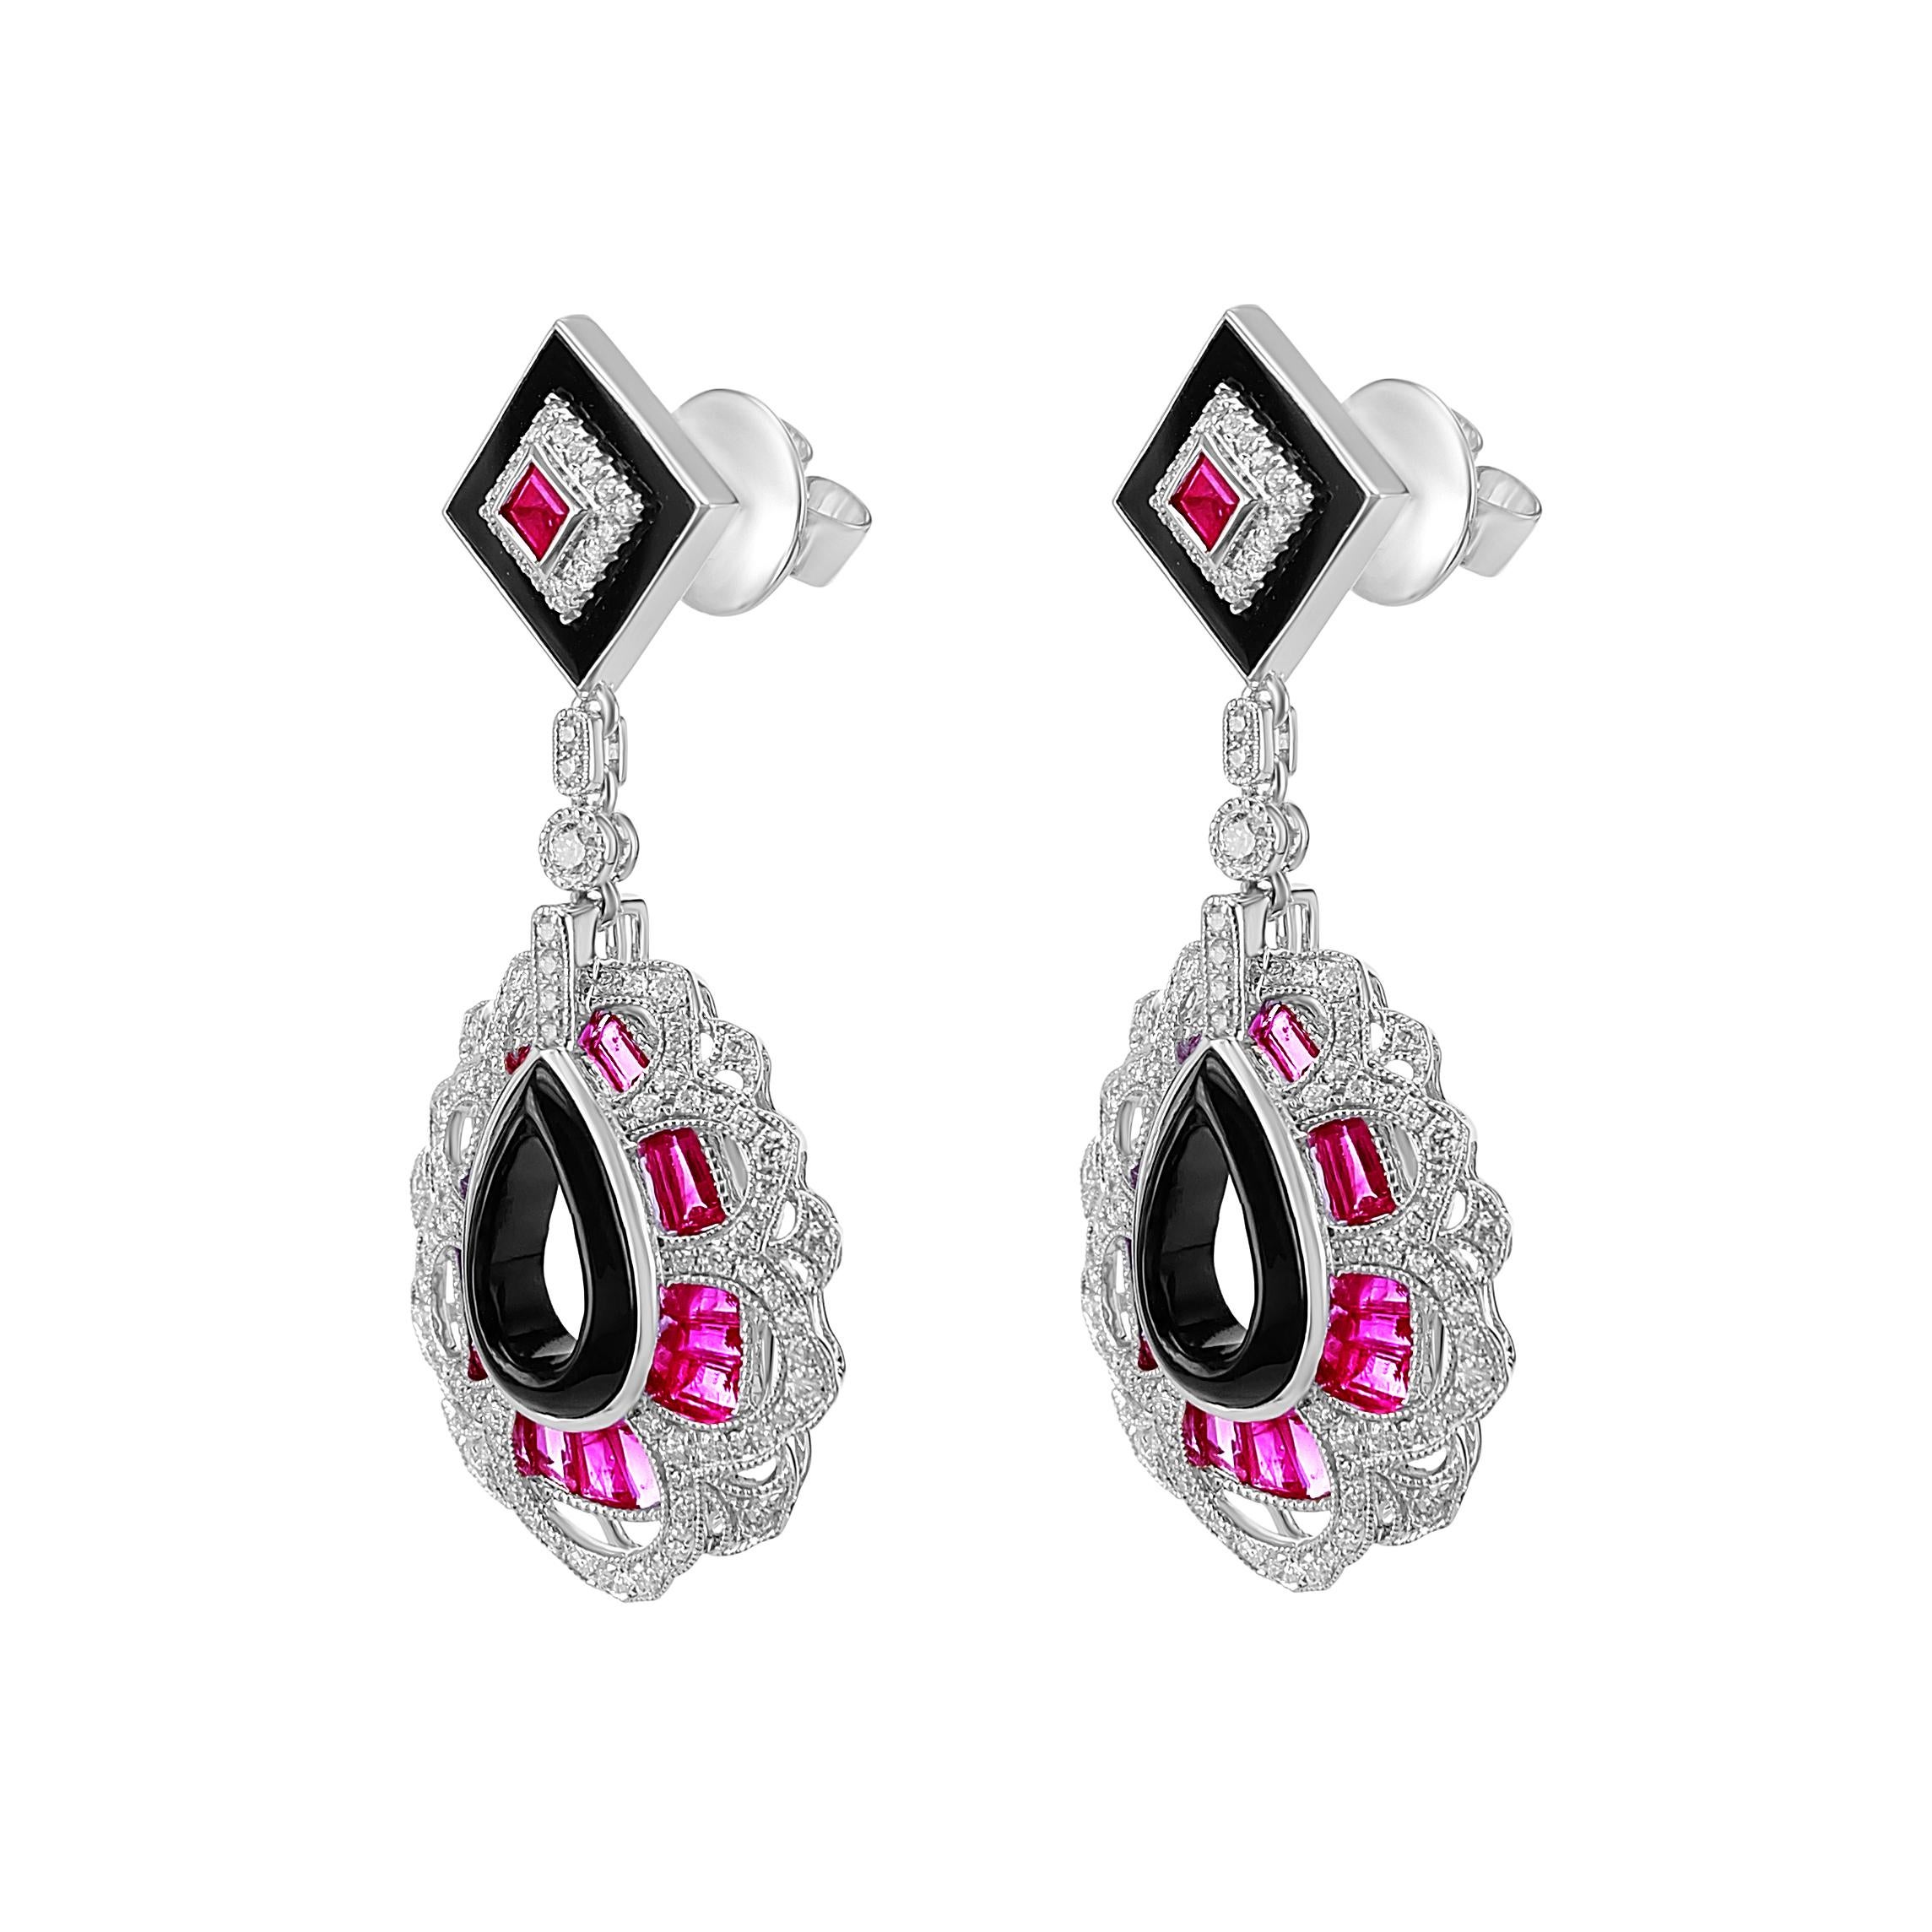 2.64 carats of Ruby and 0.79 carats of Diamond are set with Onyx to assemble together an art deco style earring. The earring can be bought as a stand-alone earring or as a set with the bangle. Please check the bangle as well from our recent